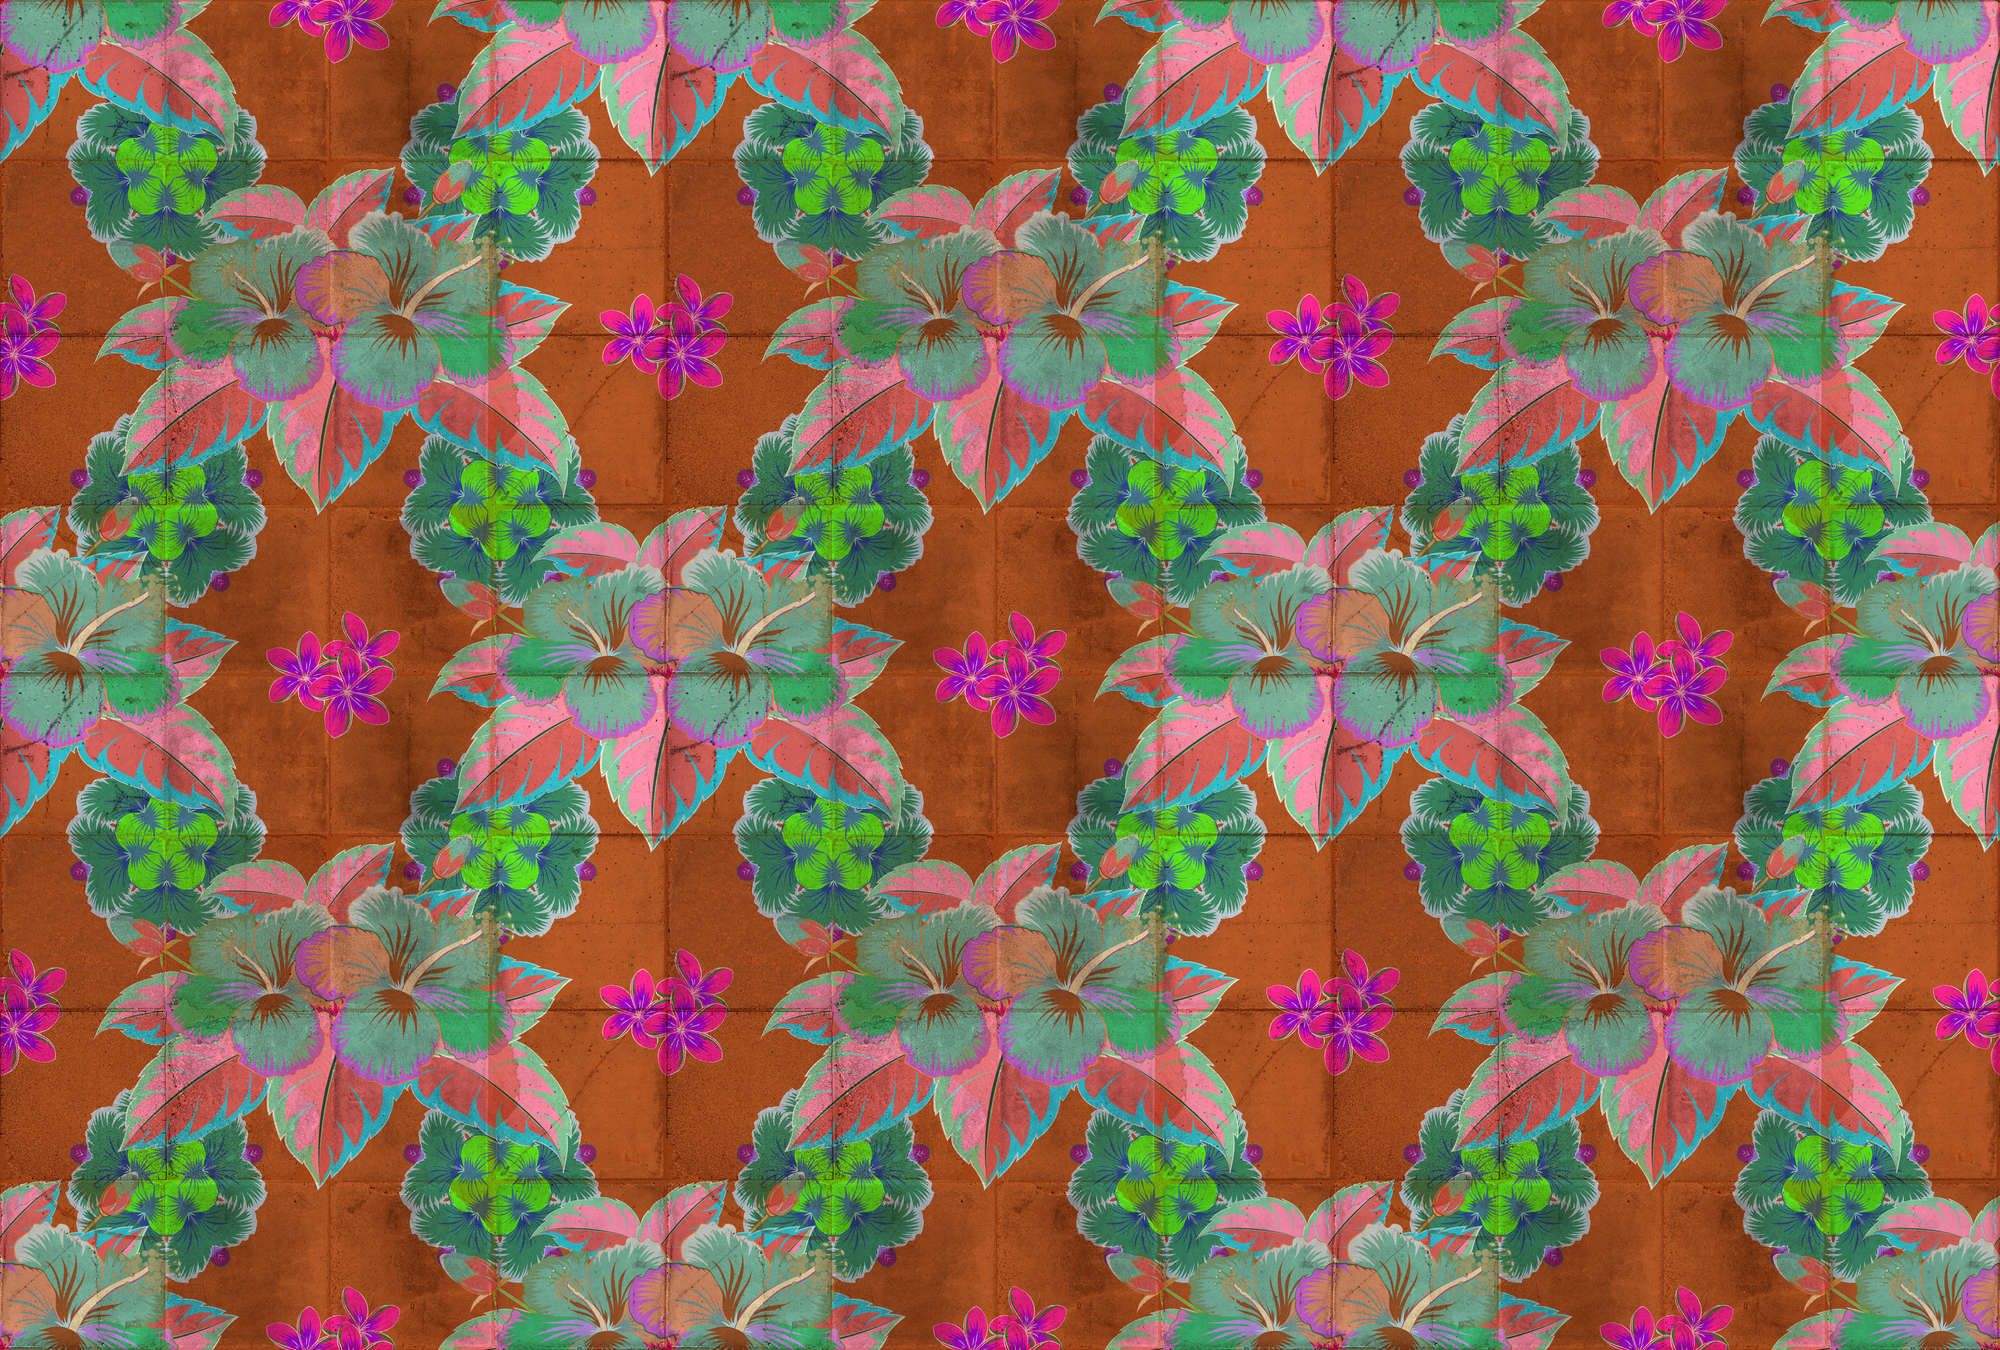             Photo wallpaper »pierre« - Leaf design with kaleidoscope effect on concrete tile structure - Smooth, slightly pearlescent non-woven fabric
        